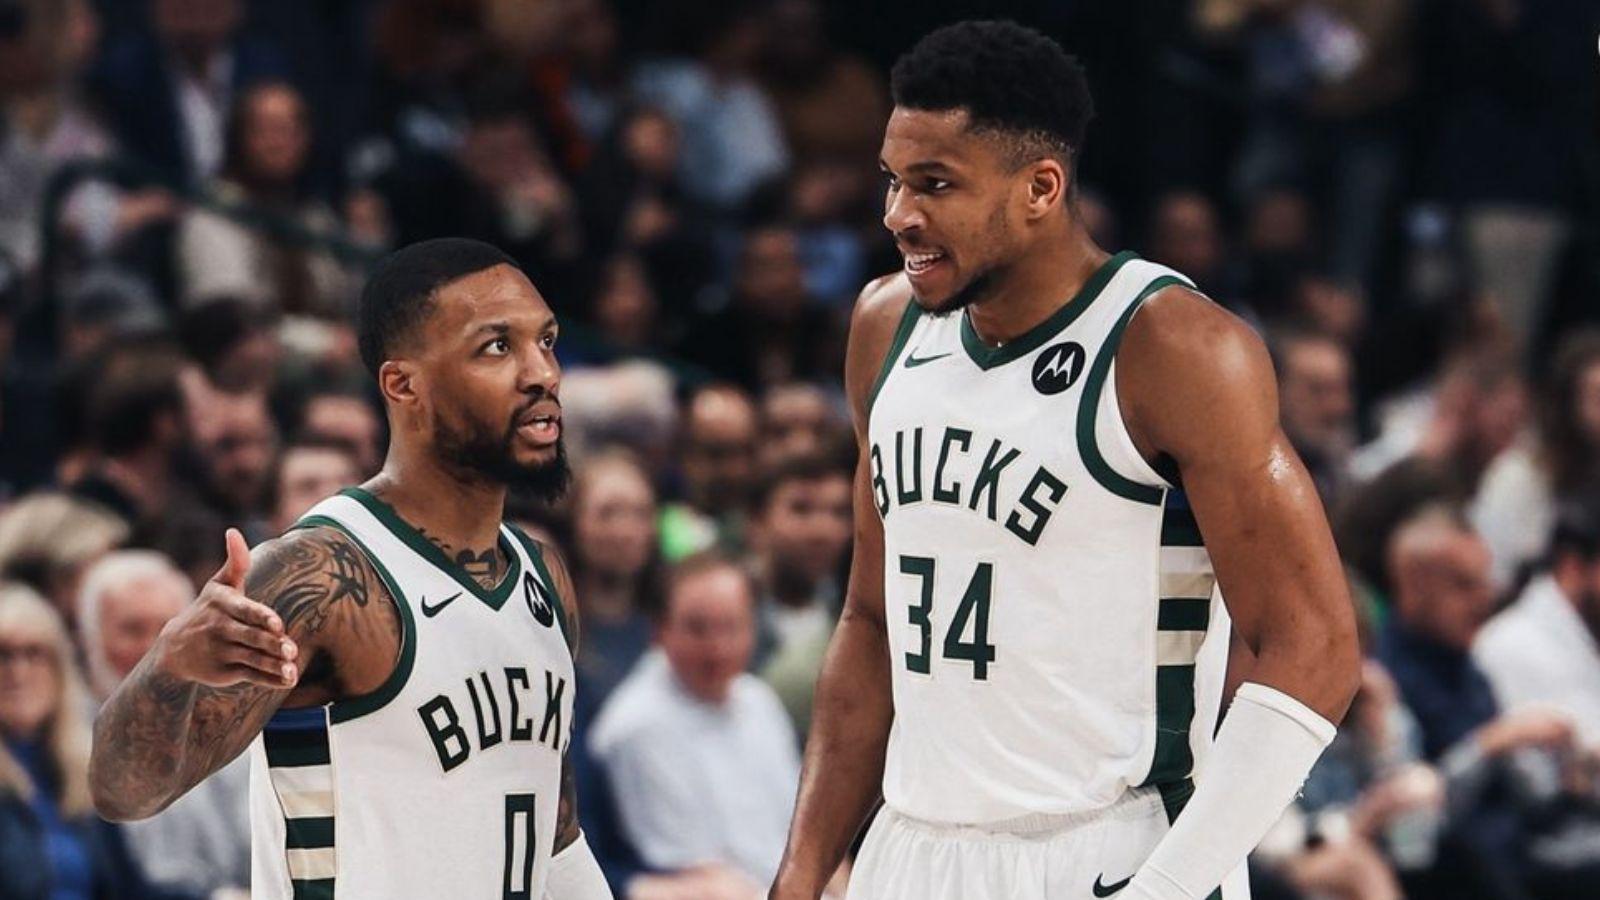 Damian Lillard (left) and Giannis Antetokounmpo (right) communicating on the floor.